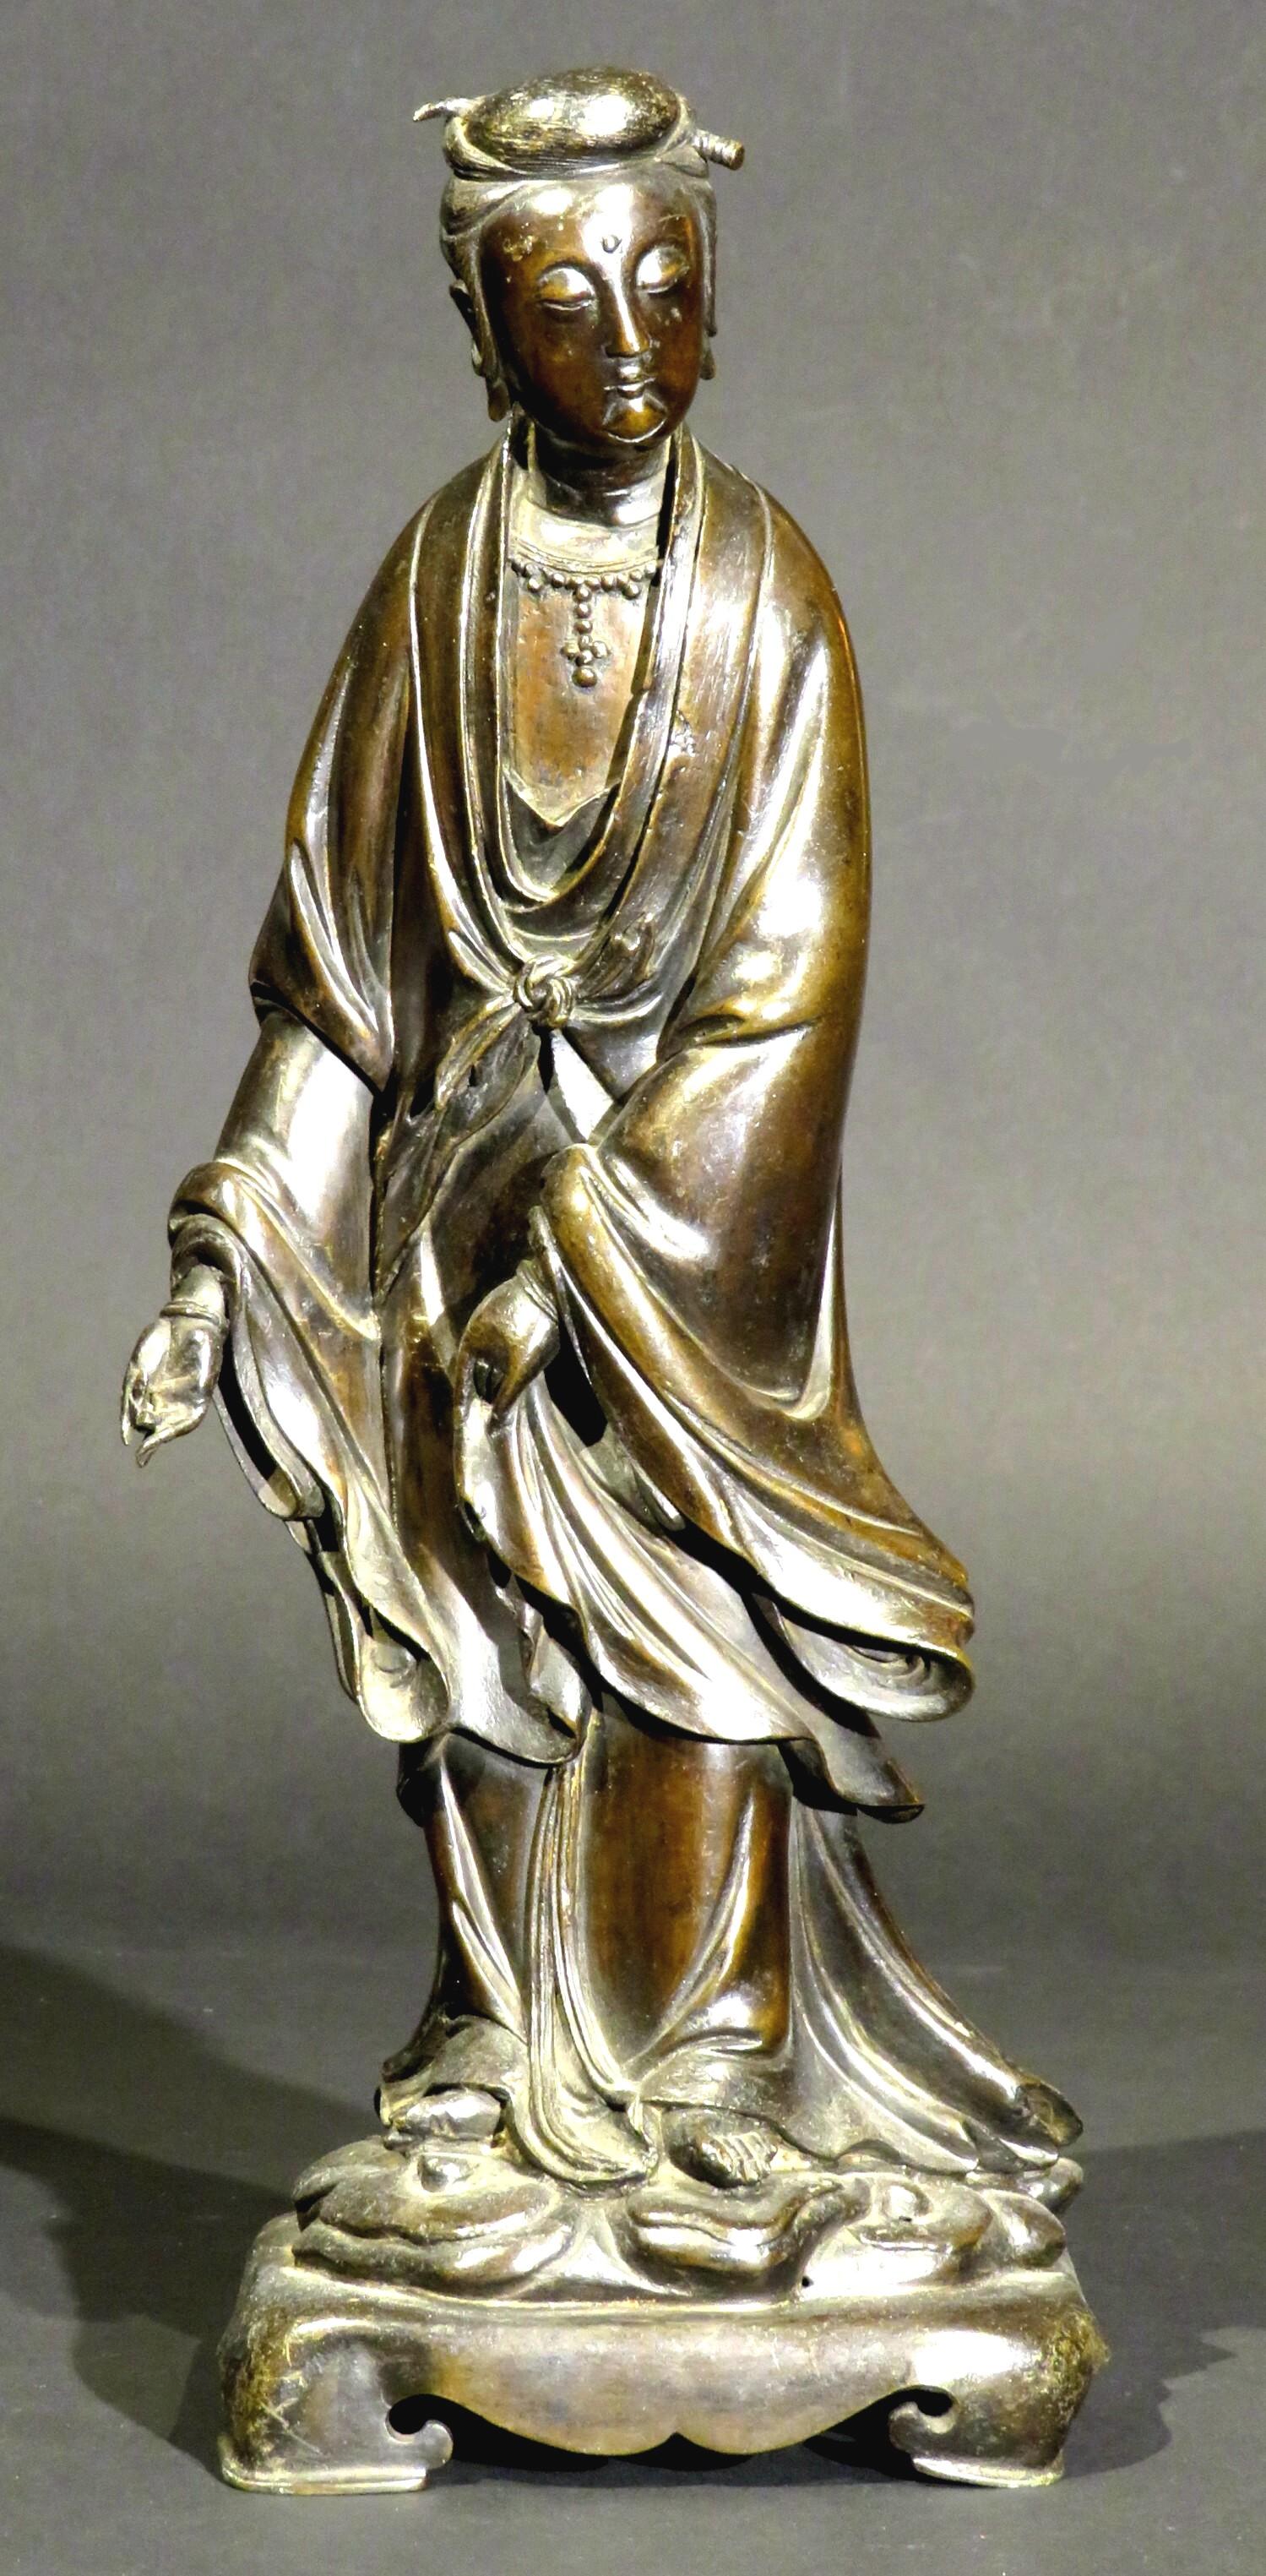 The finely cast bronze figure of Guanyin - Bodhisattva Goddess of Compassion, Kindness & Mercy. 
Shown standing atop a naturalistic mound on a scrolled rectangular base, wearing an outer robe with finely modelled cascading folds tied at her waist,